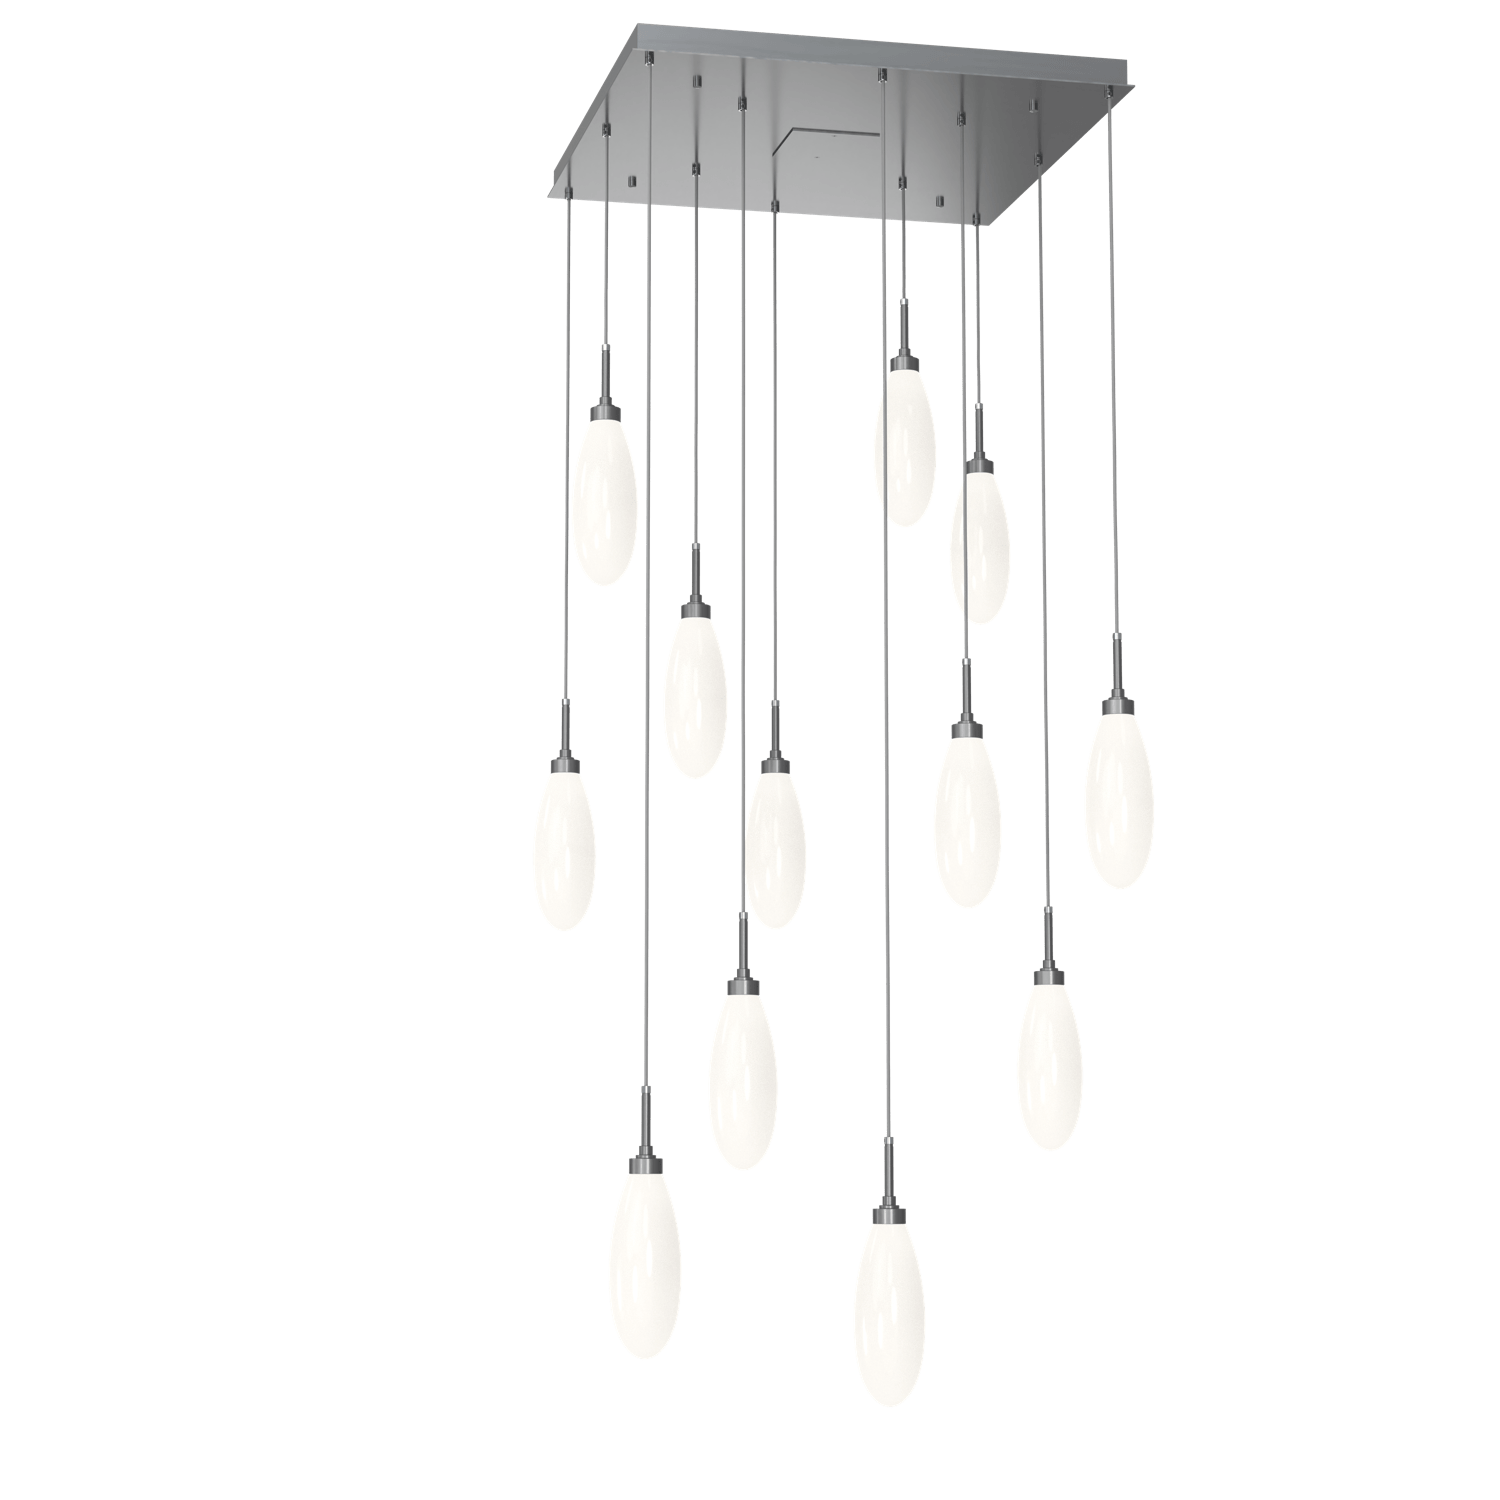 CHB0071-12-GM-WL-LL-Hammerton-Studio-Fiori-12-light-square-pendant-chandelier-with-gunmetal-finish-and-opal-white-glass-shades-and-LED-lamping